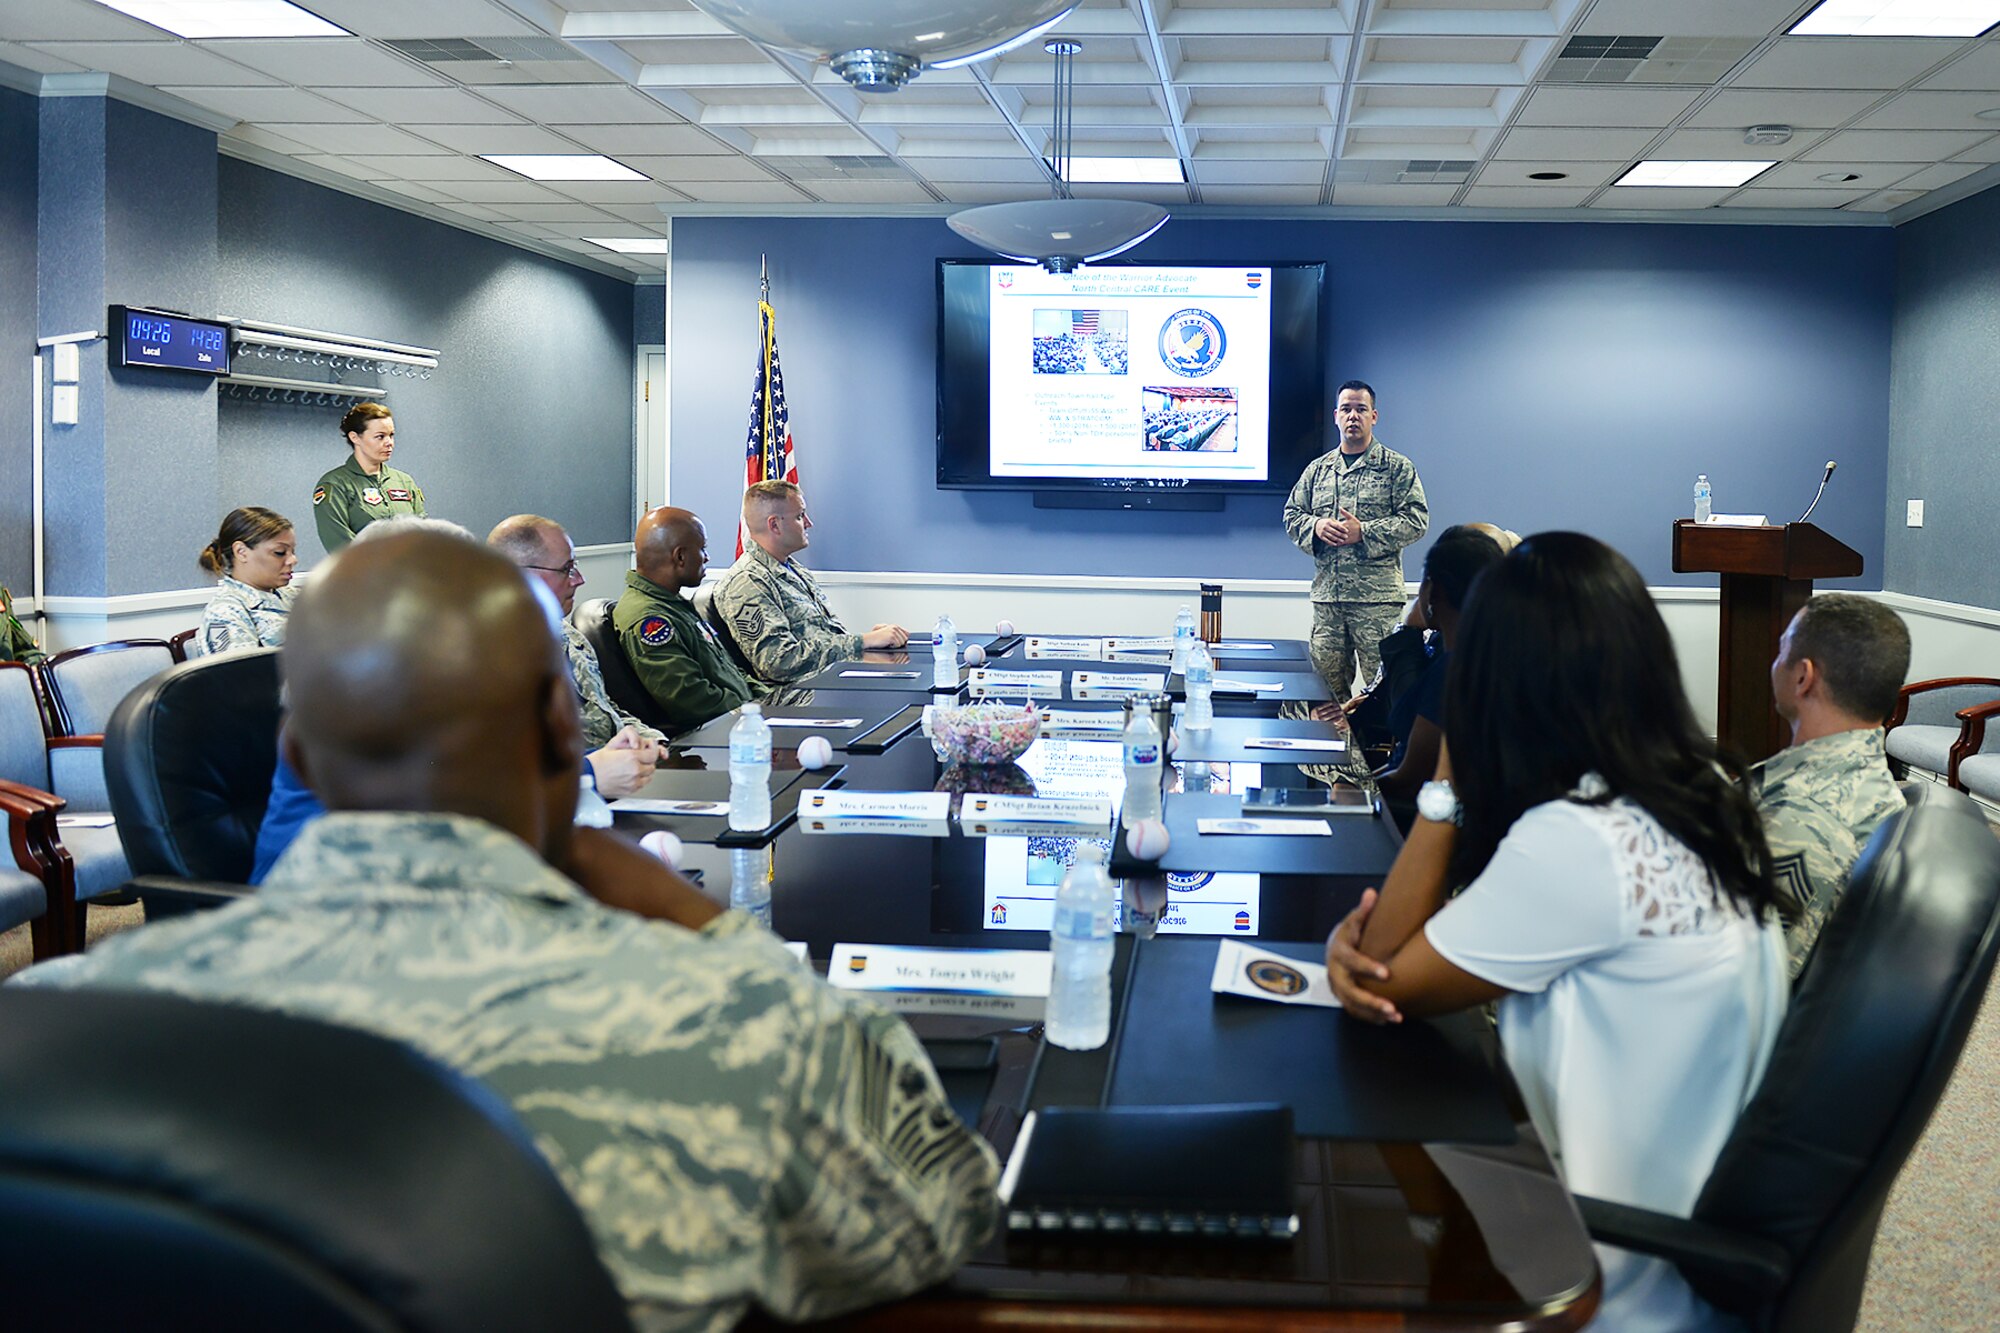 Maj. Michael Shick, 55th Wing warrior advocacy director, speaks to Chief Master Sgt. of the Air Force Kaleth O. Wright during a briefing held in the 55th Mission Support Group headquarters building on Offutt Air Force Base, Nebraska, Sept. 1, 2017.